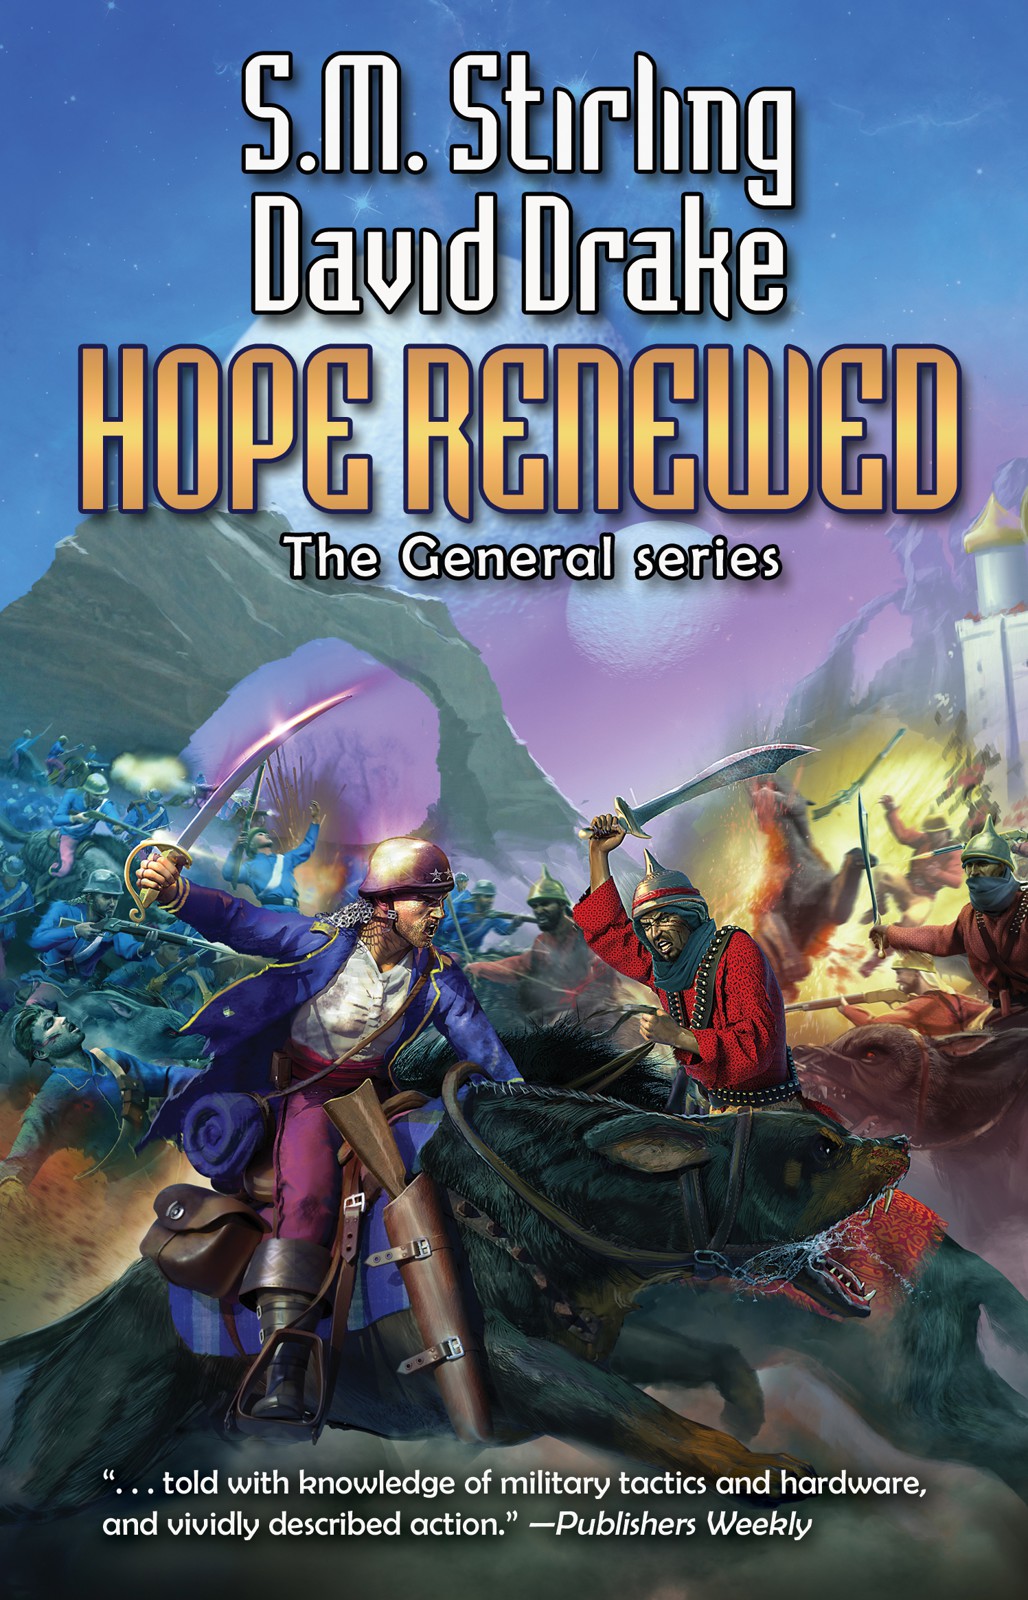 Hope Renewed by S.M. Stirling